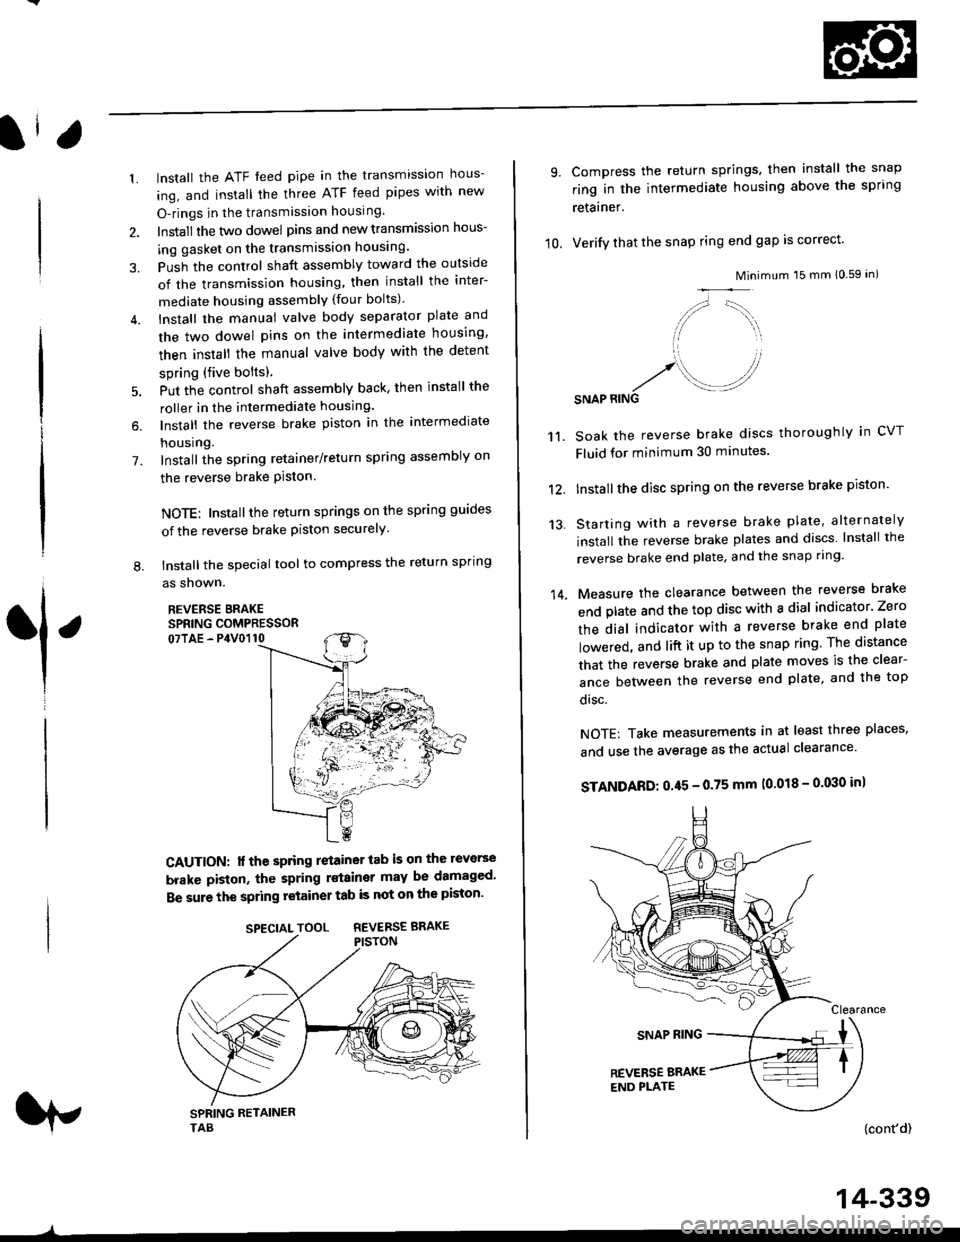 HONDA CIVIC 2000 6.G Workshop Manual 1.
7.
lnstall the ATF feed pipe in the transmission hous-
ing, and install the three ATF feed pipes with new
O-rings in the transmission housing,
Install the two dowel pins and new transmission hous-
